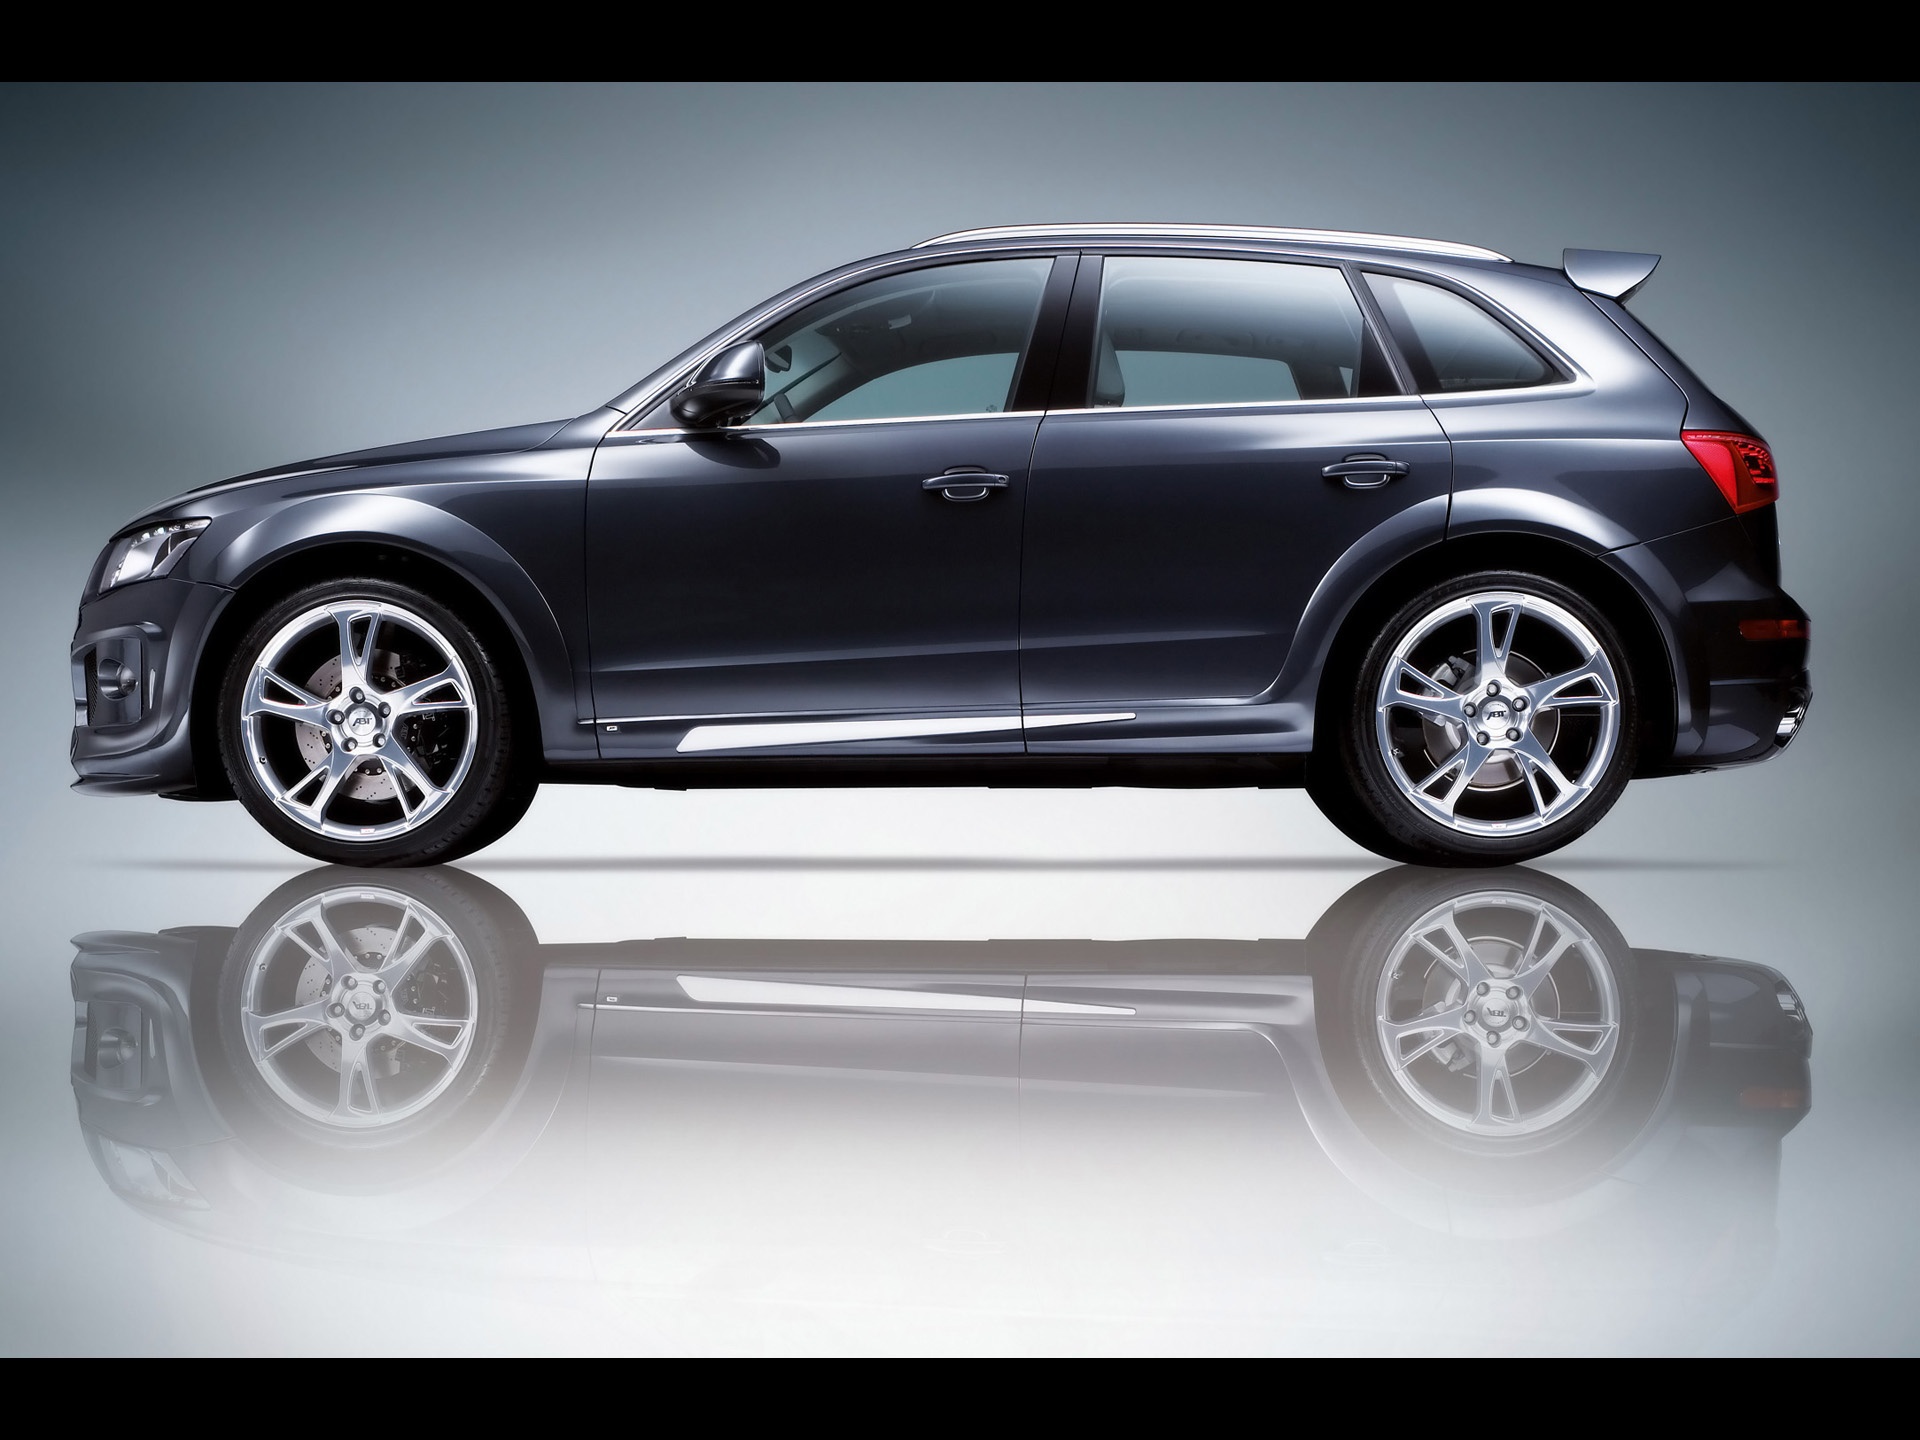 Reliable car Audi q5 wallpapers and images - wallpapers, pictures ...